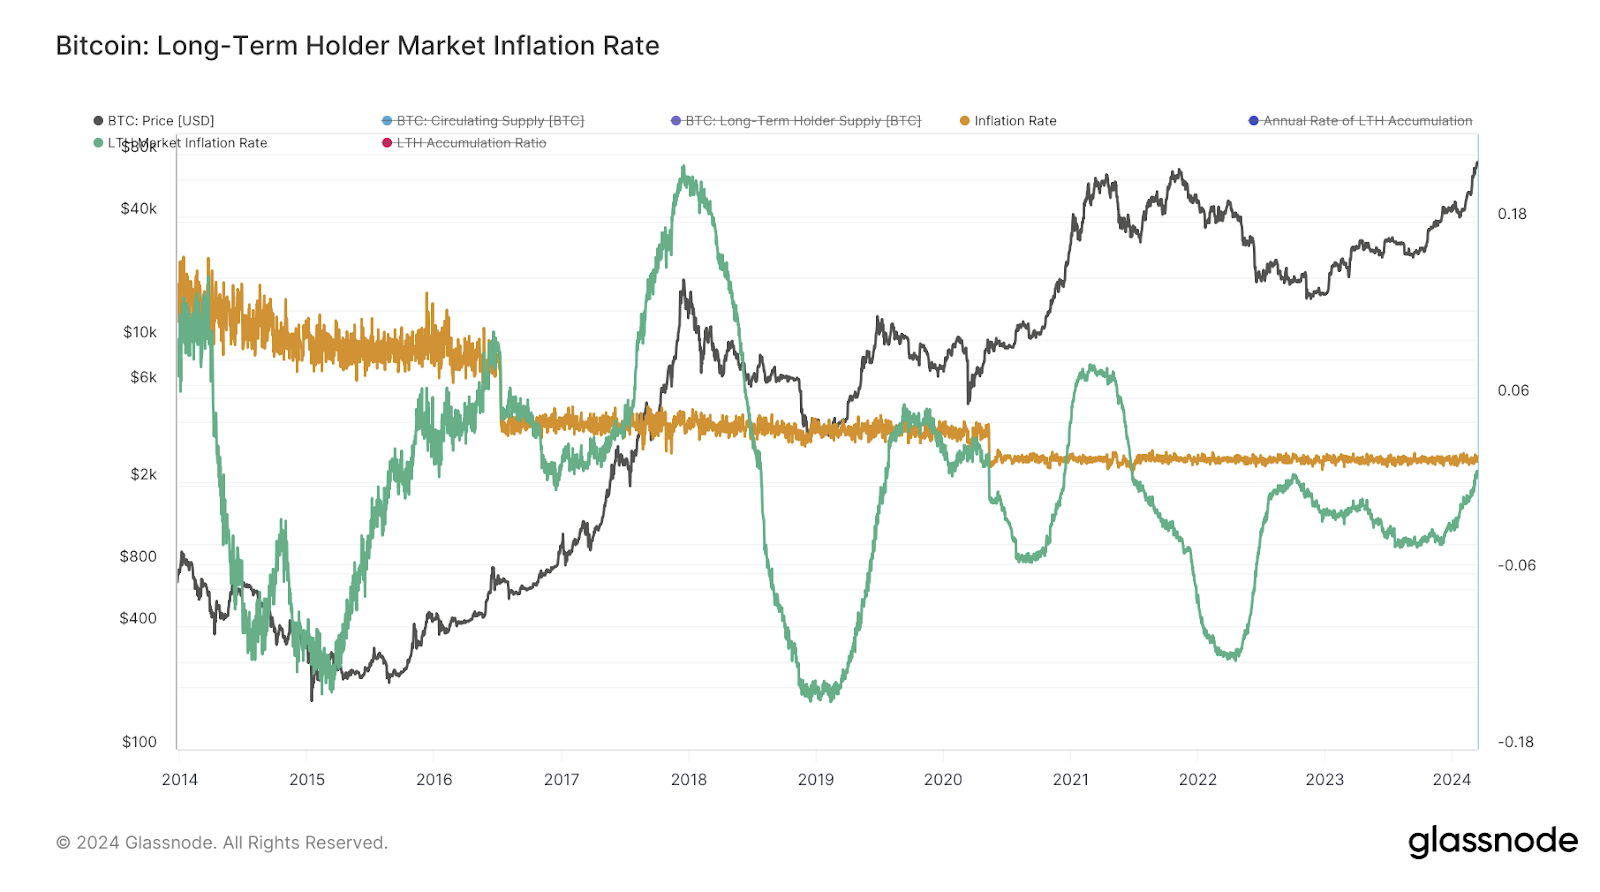 The Long-Term Holder Market Inflation Rate is an annualized rate of Bitcoin accumulation/distribution by LTHs relative to daily miner issuance.